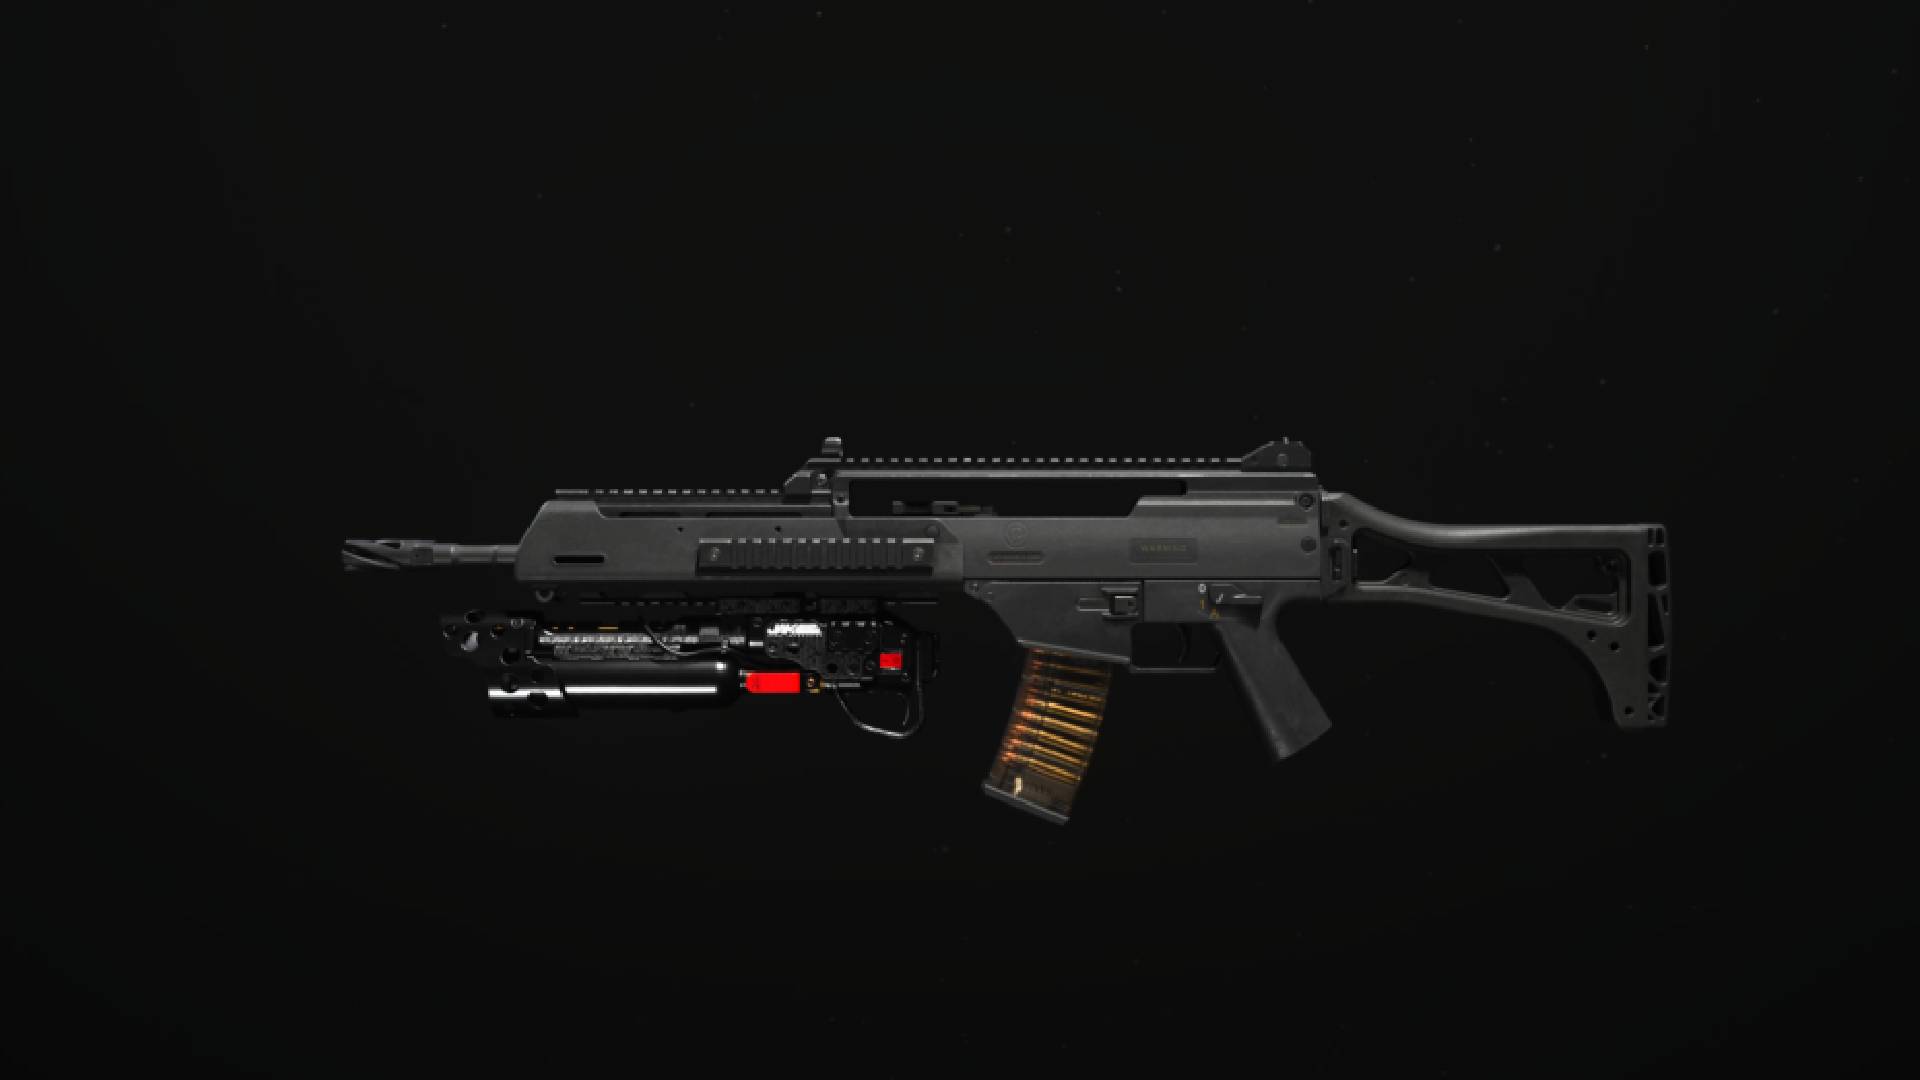 Call of Duty: MW3 Holger 556 with Jak Purifier Underbarrel. This item is a Non-Drill Charge Underbarrel and completes the Forged Camo challenge.